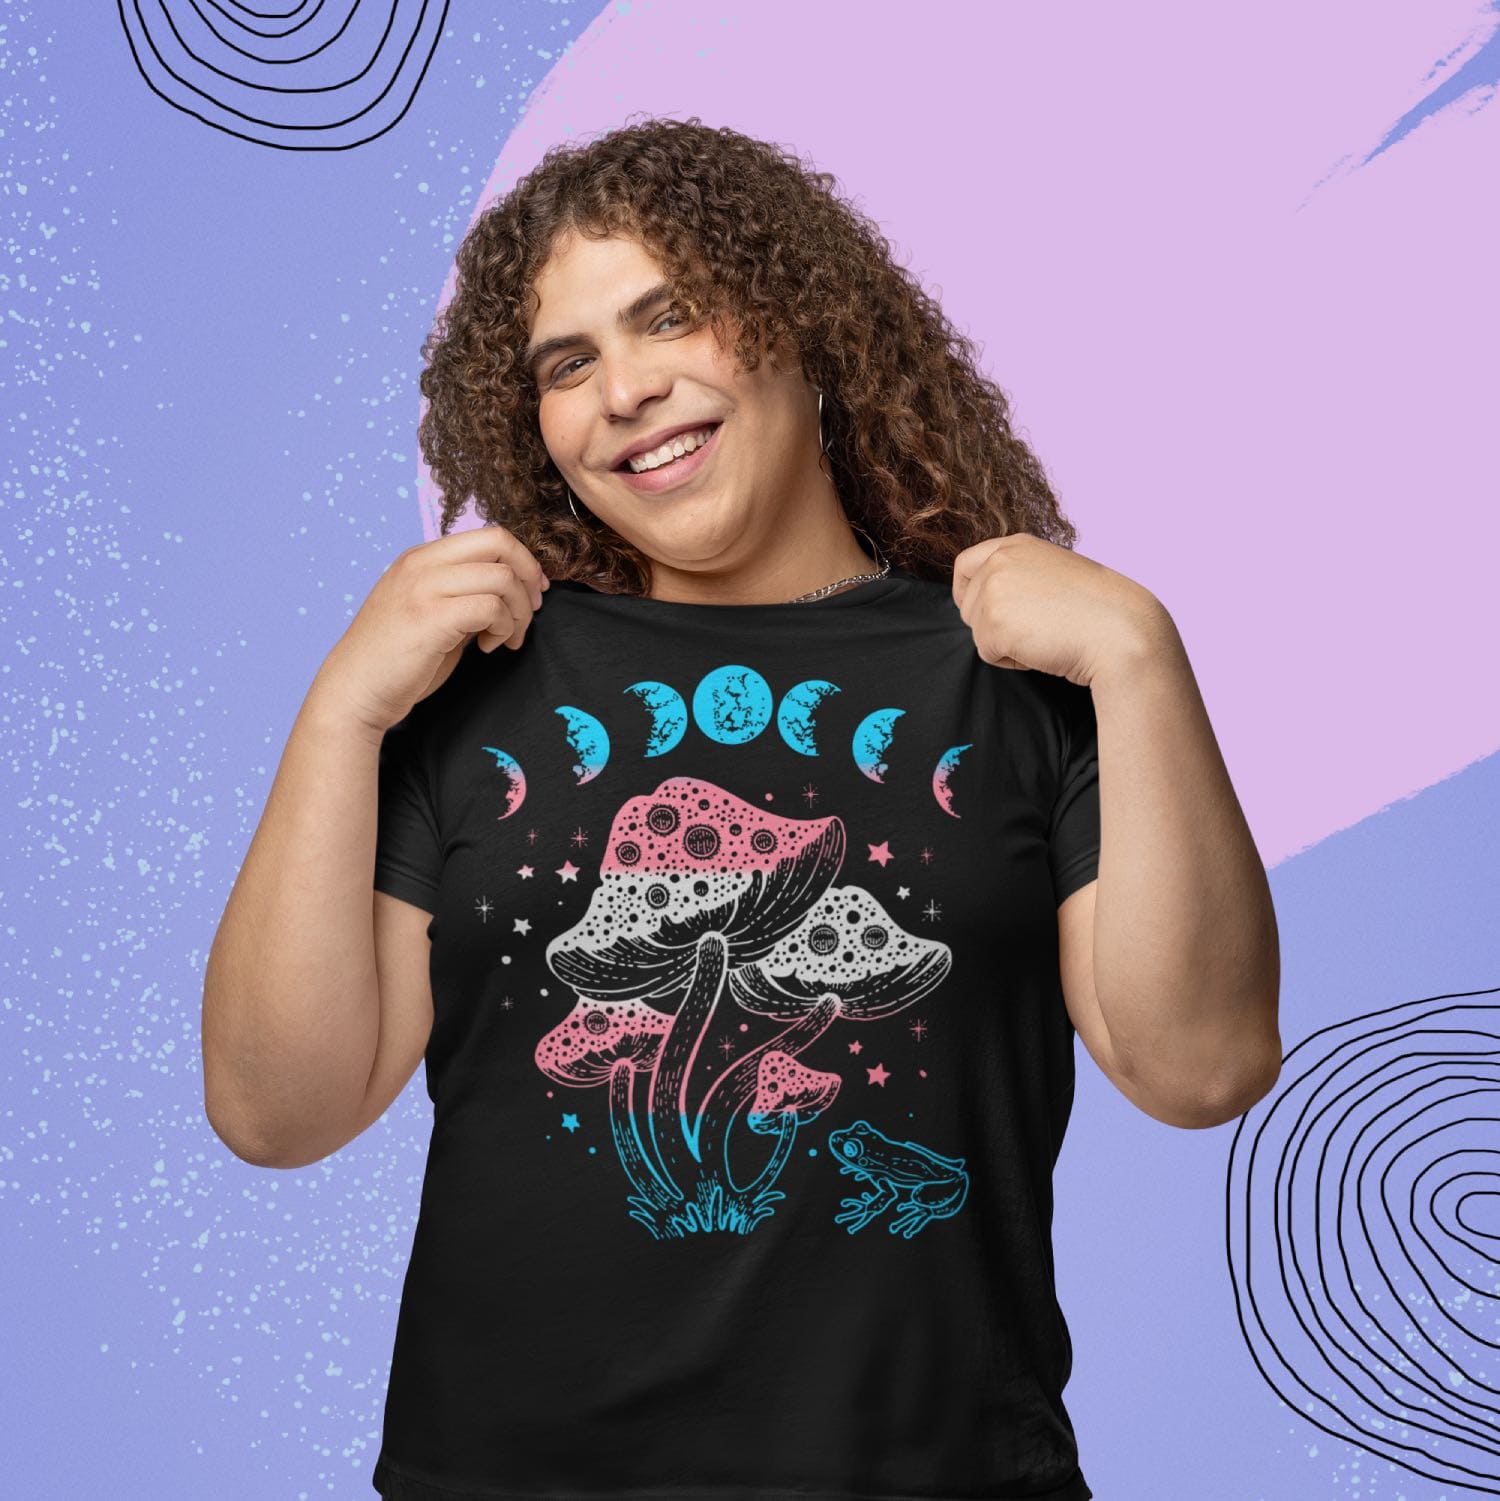 transgender shirt, cottagecore design with frog, mushrooms and moon phases, in use